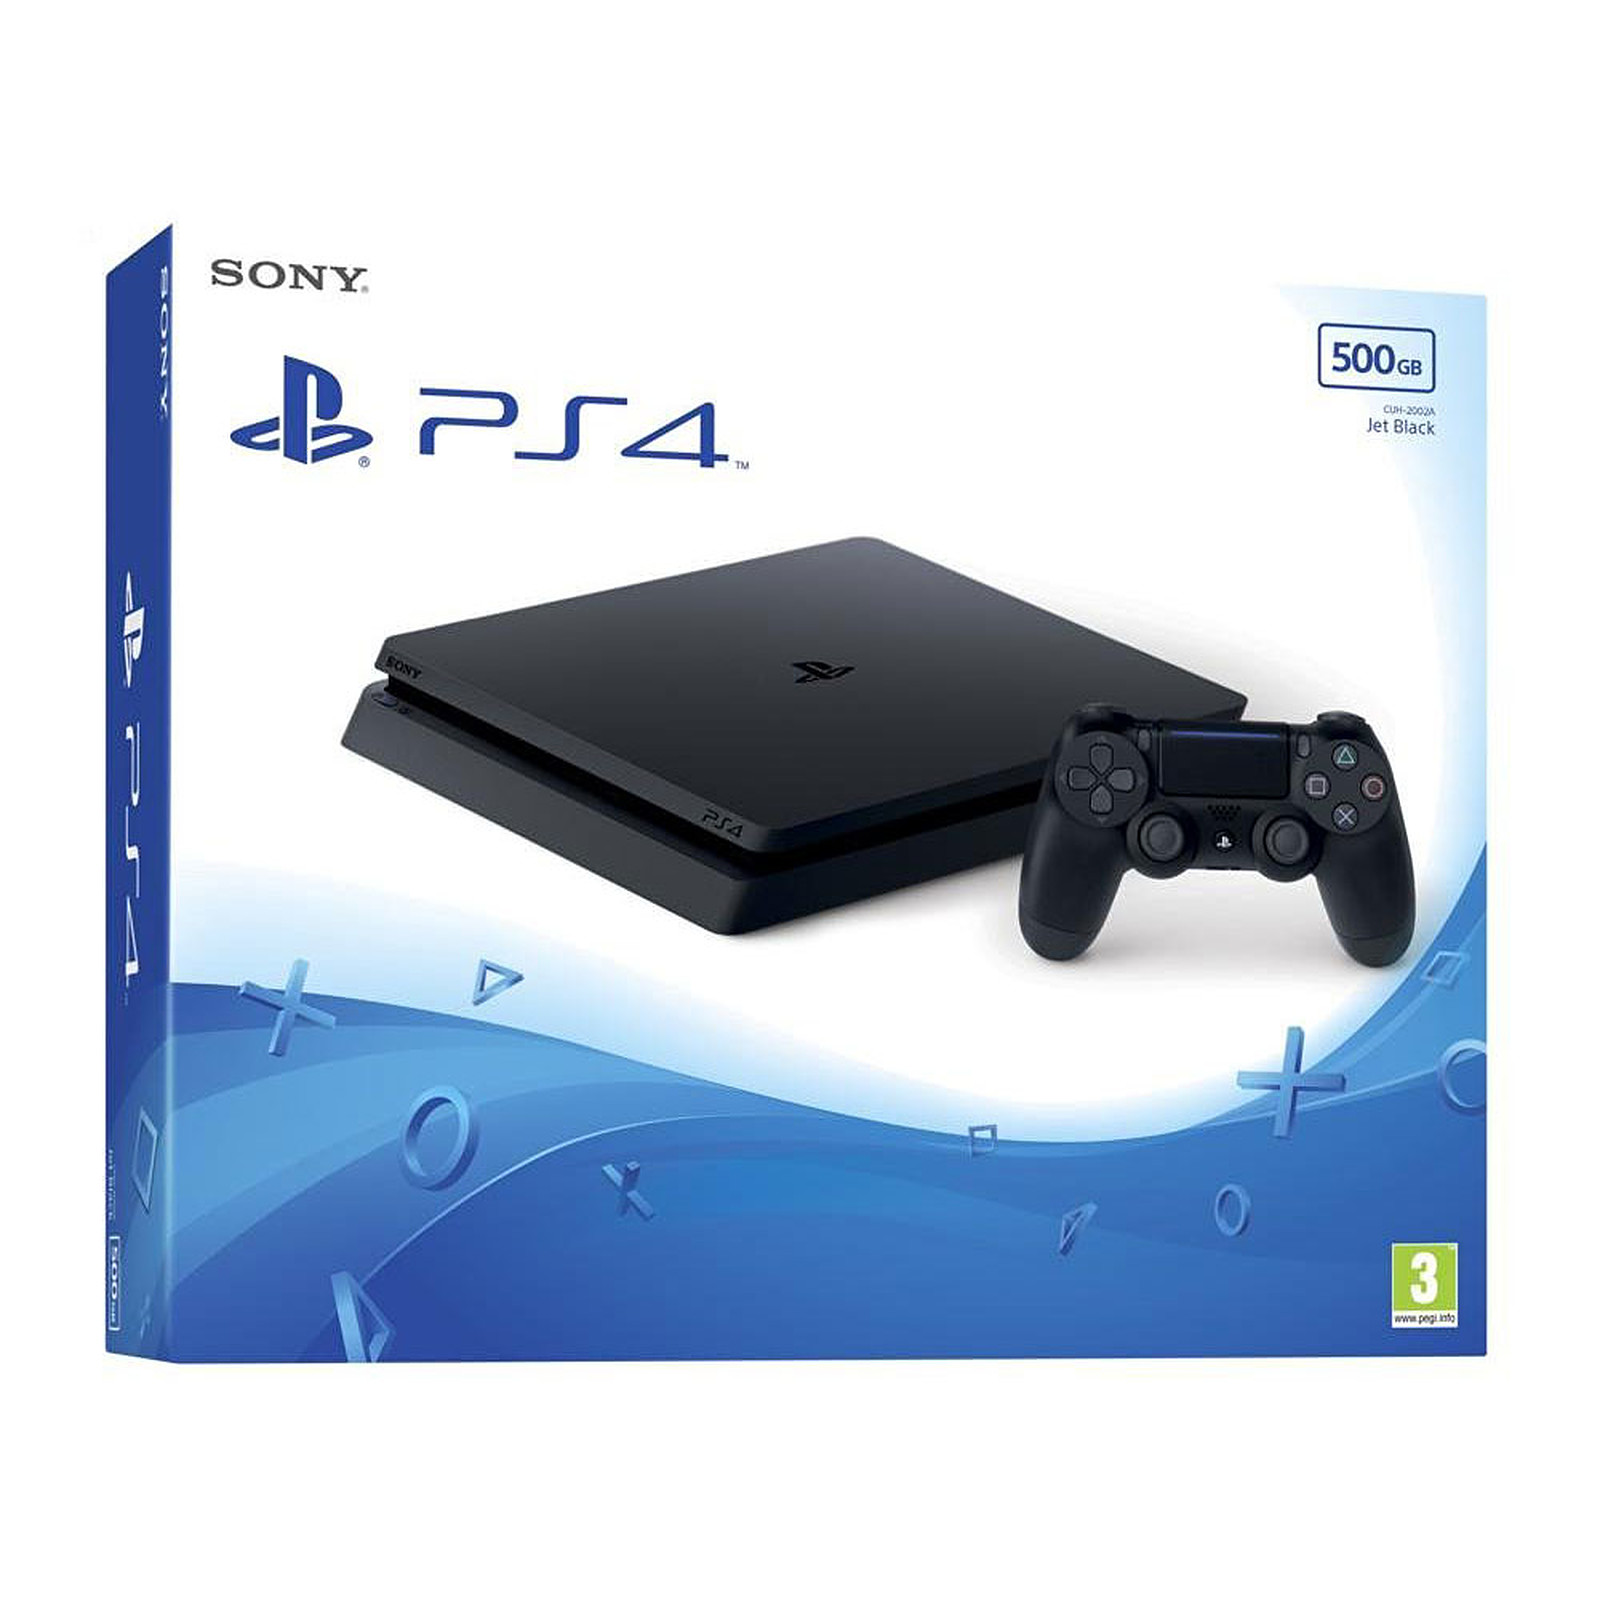 Sony PlayStation 4 Slim (500 Go) - Jet Black - Console PS4 Sony Interactive Entertainment